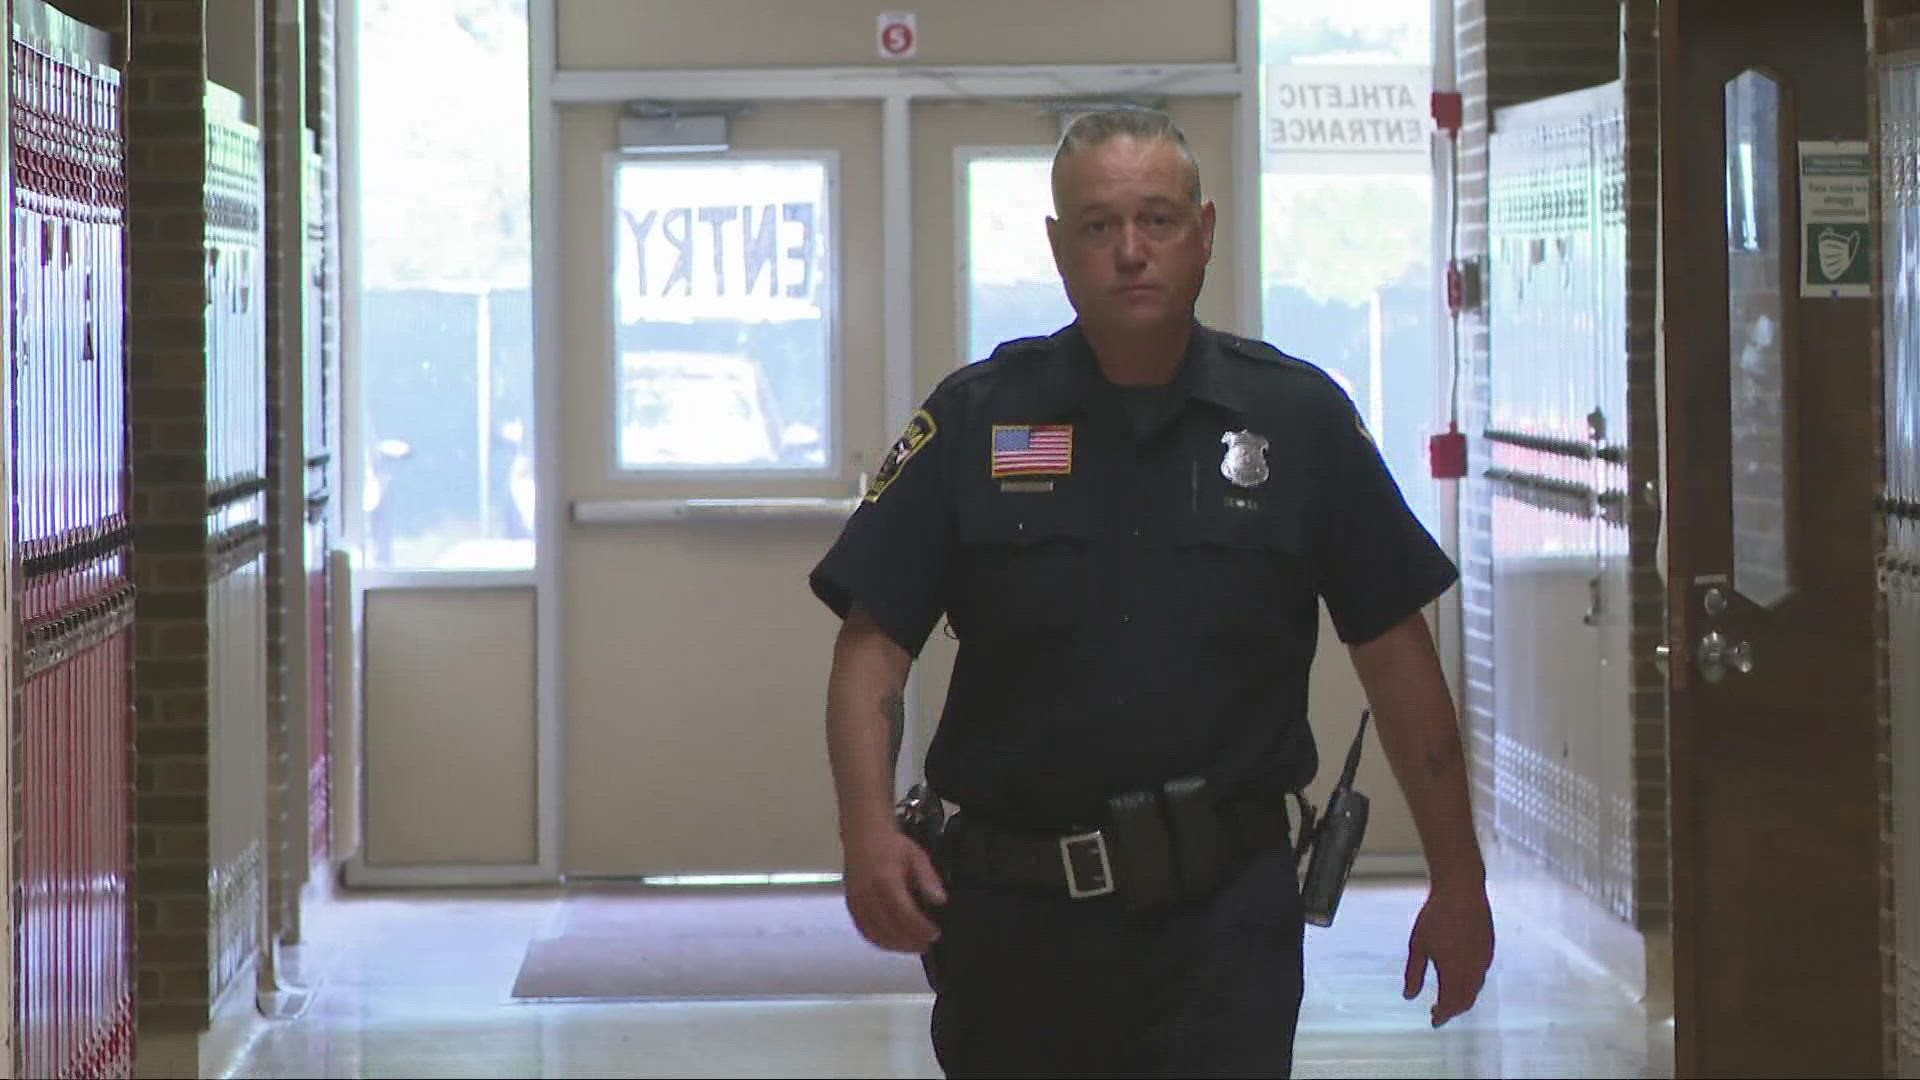 The school resource officer in Parma has over two decades of law enforcement experience under his belt.